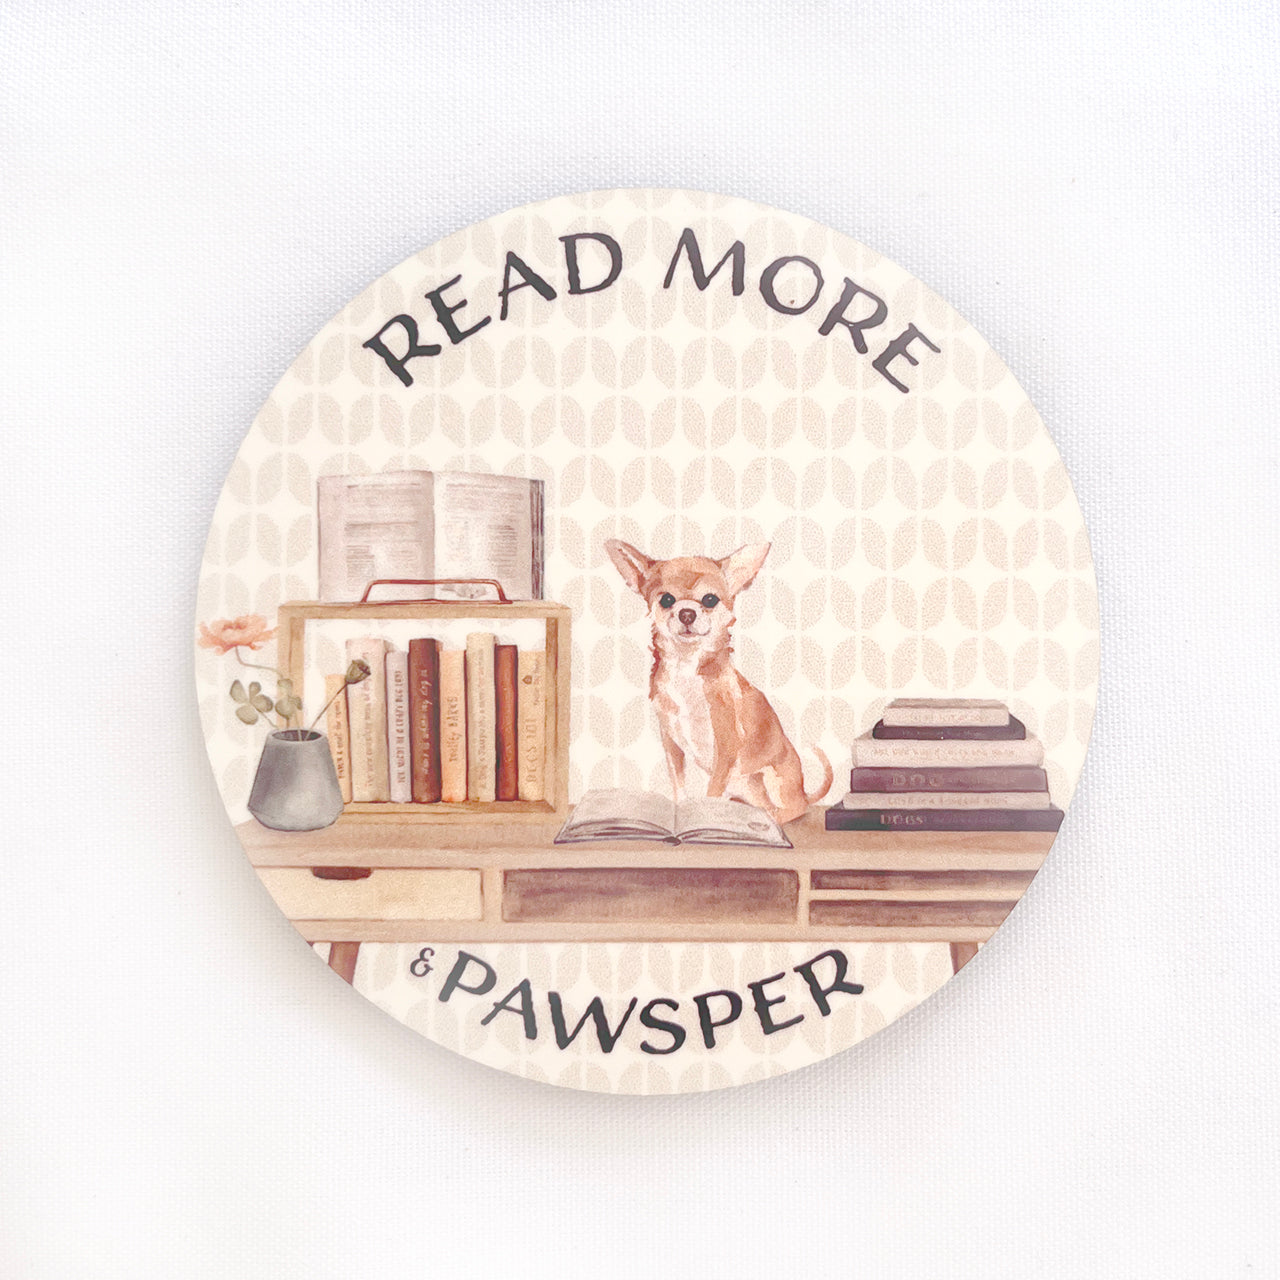 Set of 3. "Read More & Pawsper". Dog Themed Coasters. Adorable. Durable.